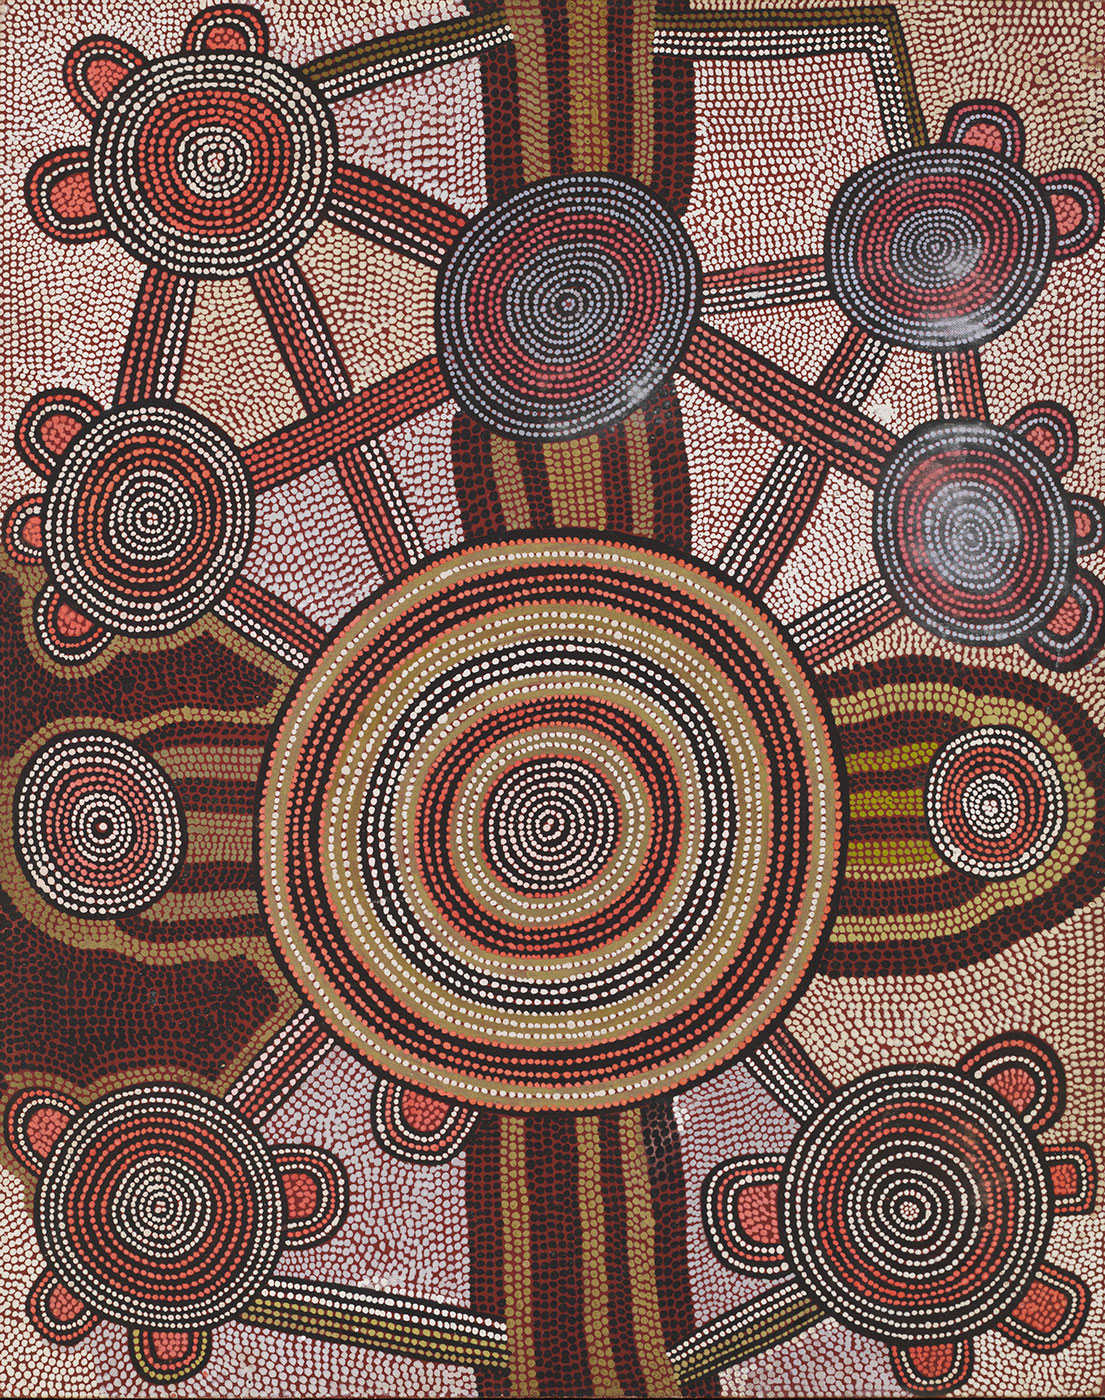 Ngunarrmanya 1974 by Freddy West Tjakamarra. - click to view larger image